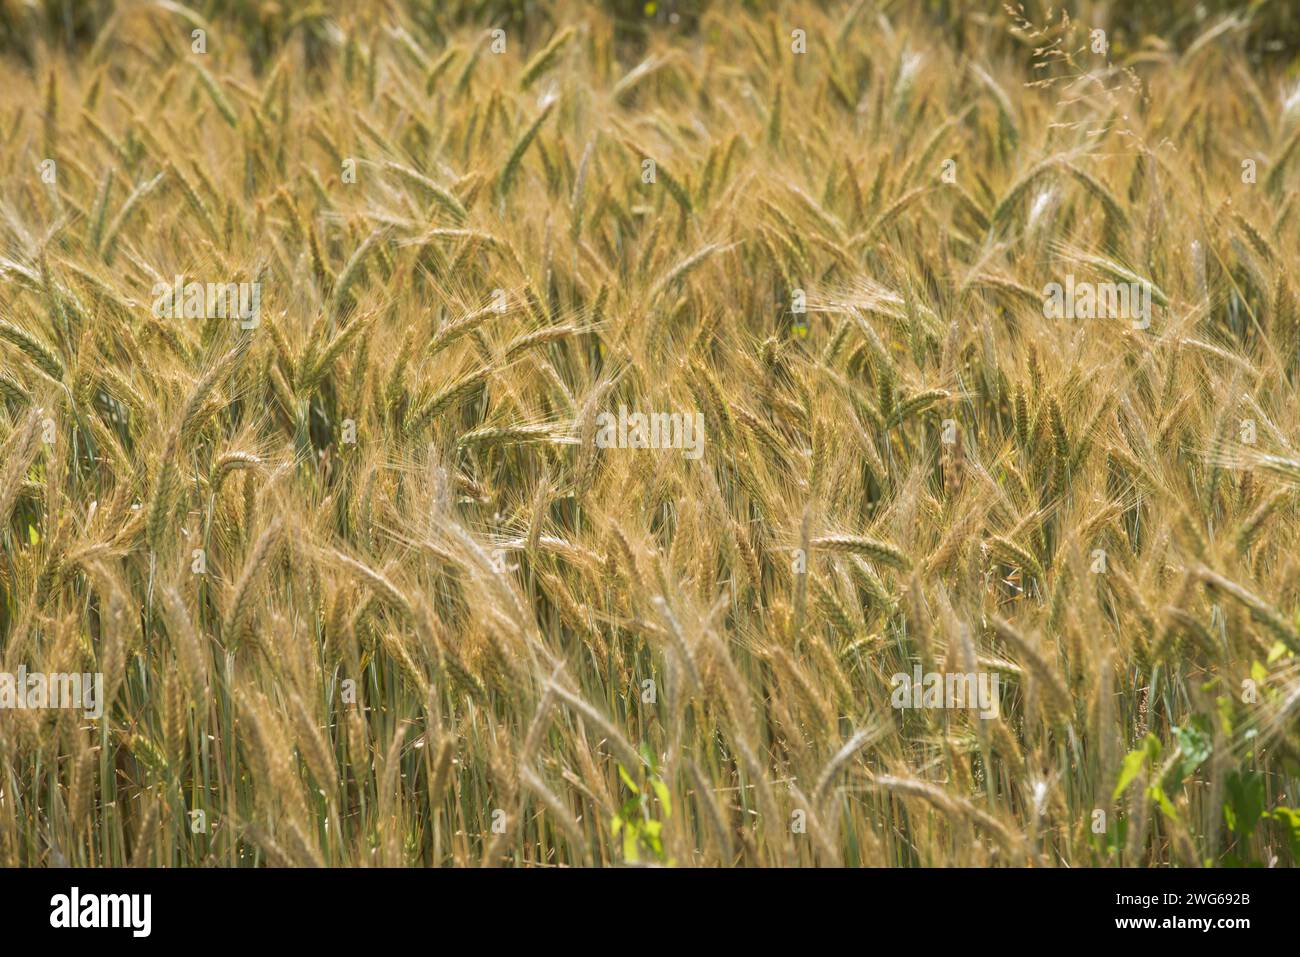 Wheat field in agriculture, growing cereal crops for food production a wheat field in agriculture Stock Photo